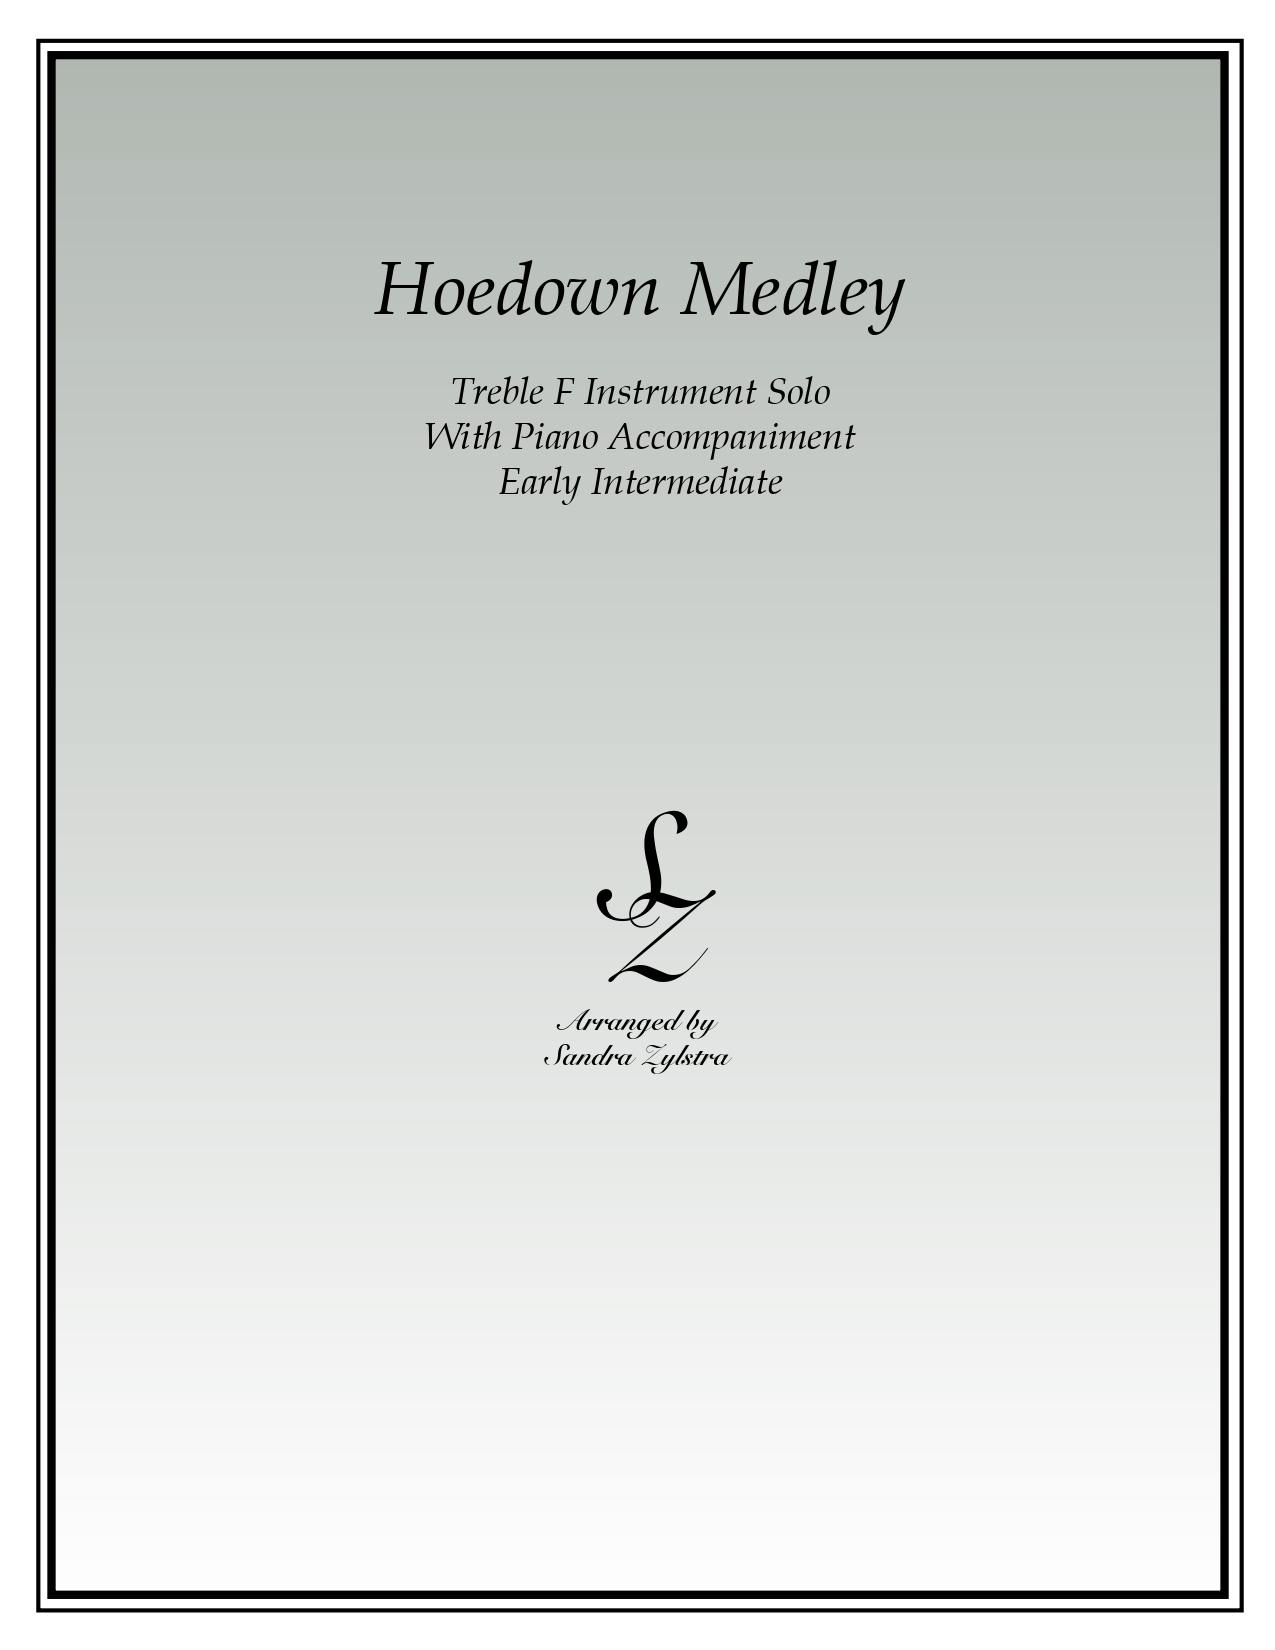 Hoedown Medley F instrument solo part cover page 00011